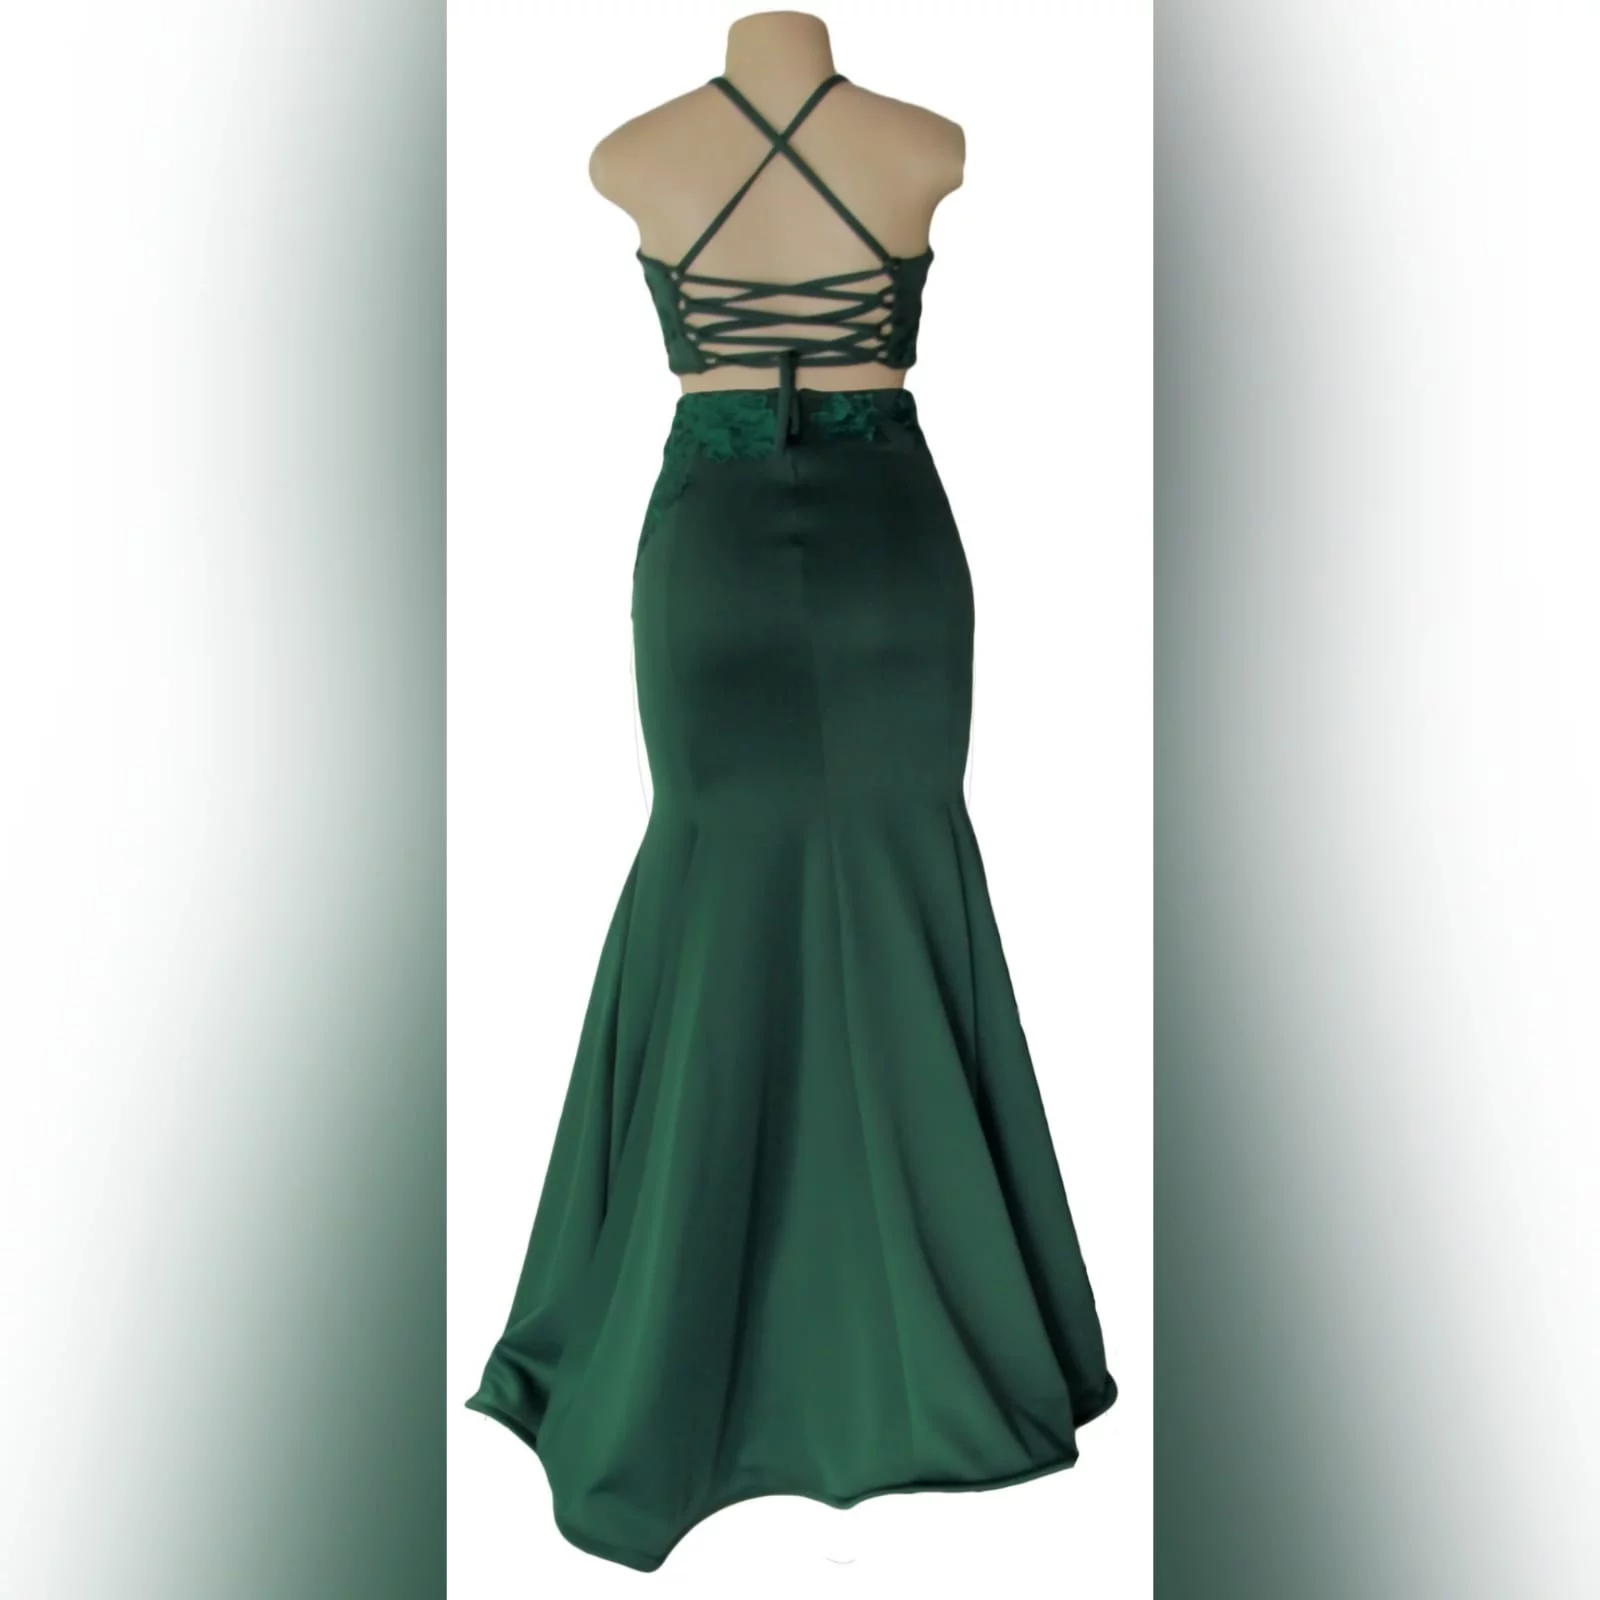 2 piece emerald green mermaid prom dress 4 2 piece emerald green mermaid prom dress. A gorgeous crop top with a lace-up open back, with a mermaid skirt. Lace detail on skirt and top for a classic touch.